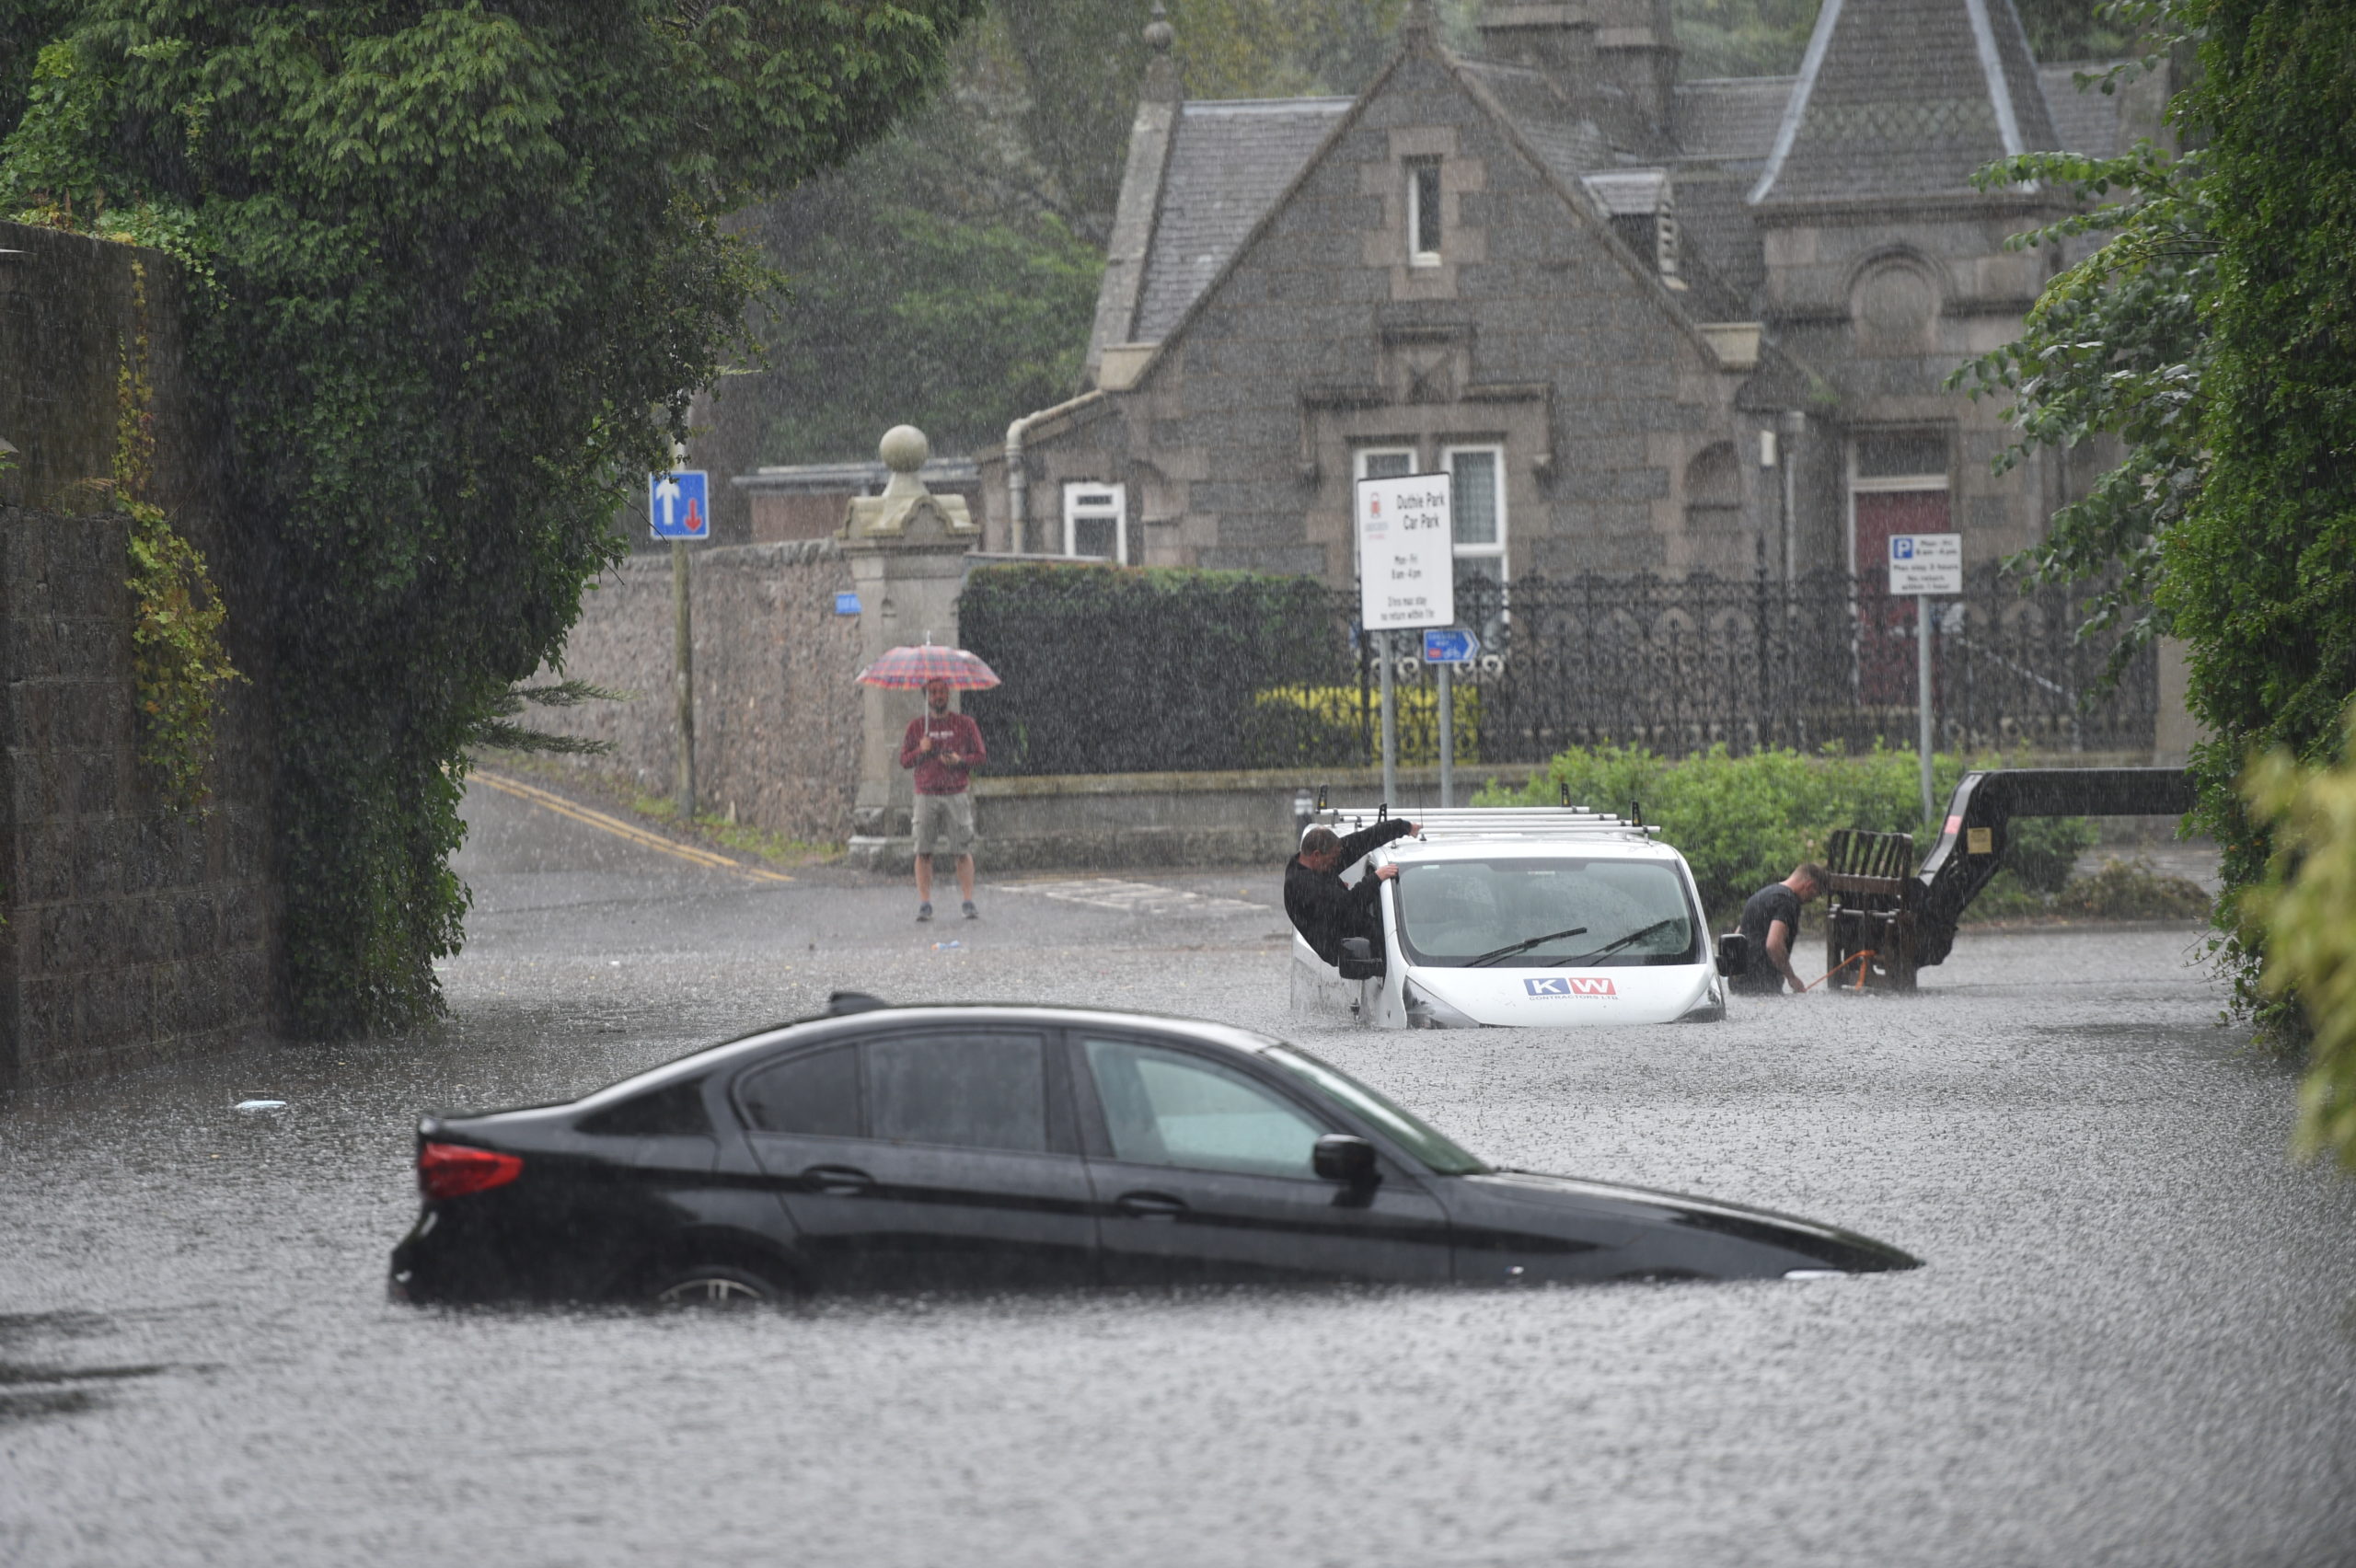 Flooding near Duthie Park, Aberdeen, following a night of storms across the country.

Pic by Darrell Benns 12/08/2020.